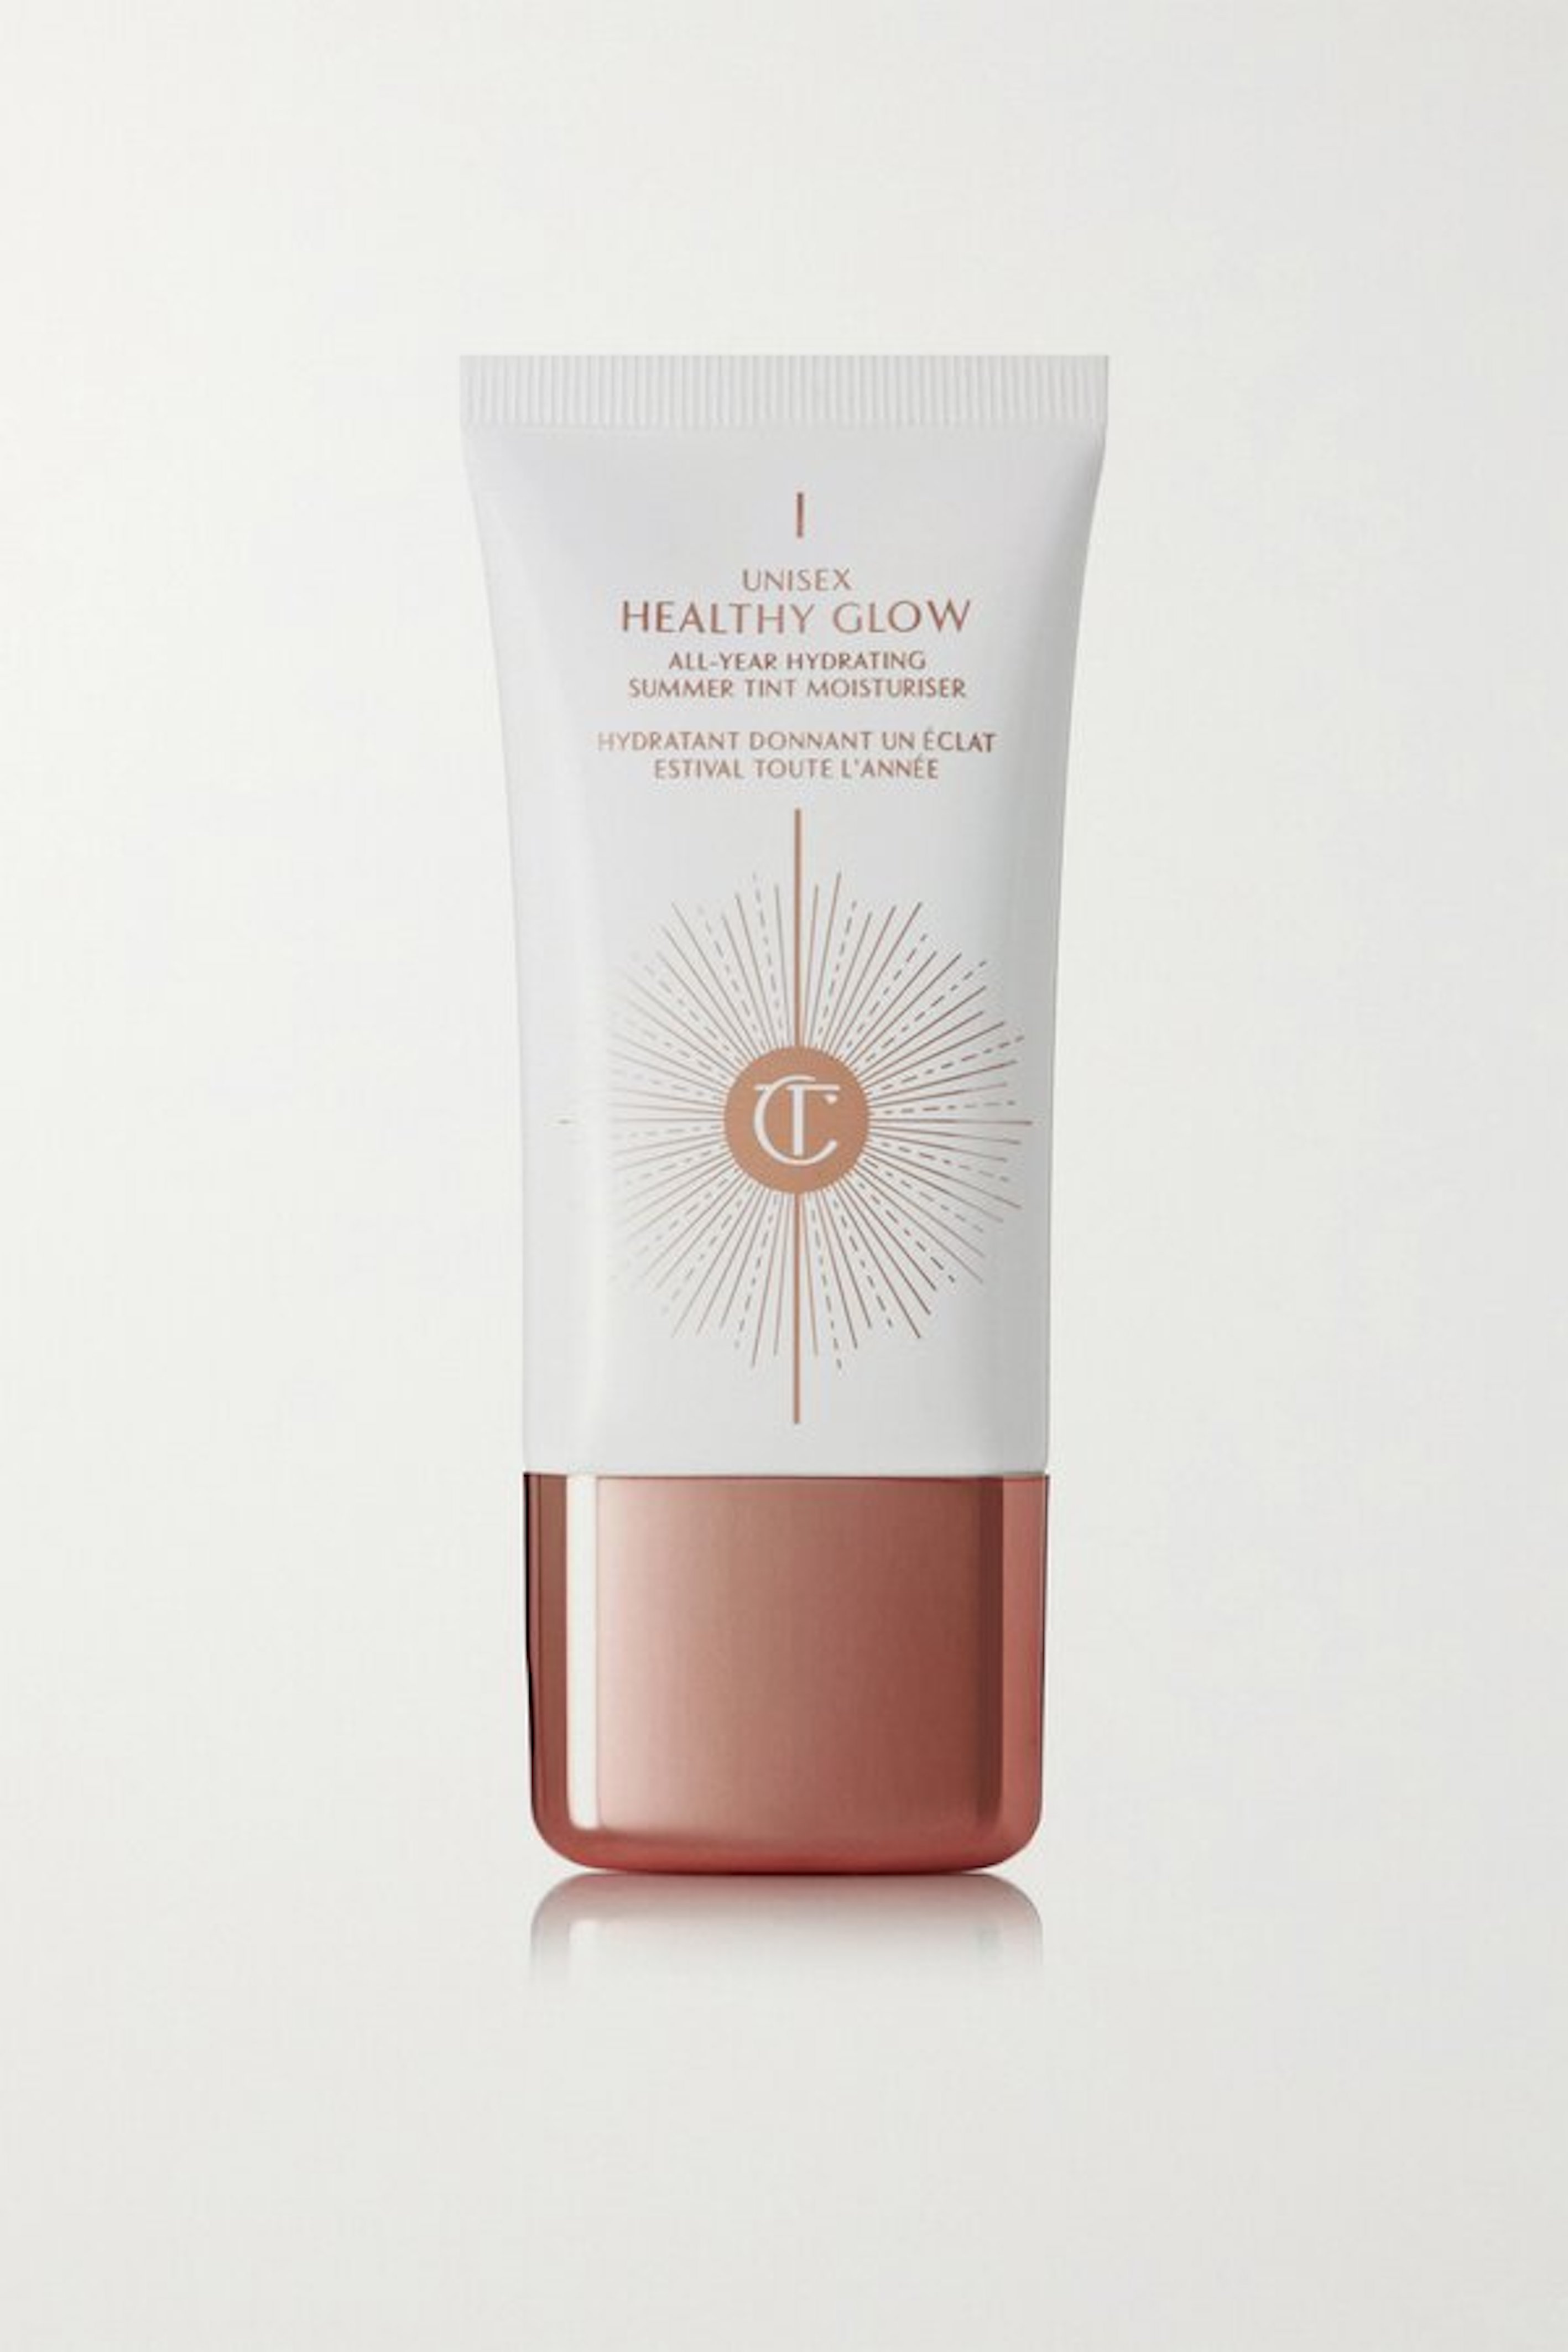 Charlotte Tilbury Unisex Healthy Glow - Get the no-makeup makeup look with this iconic product